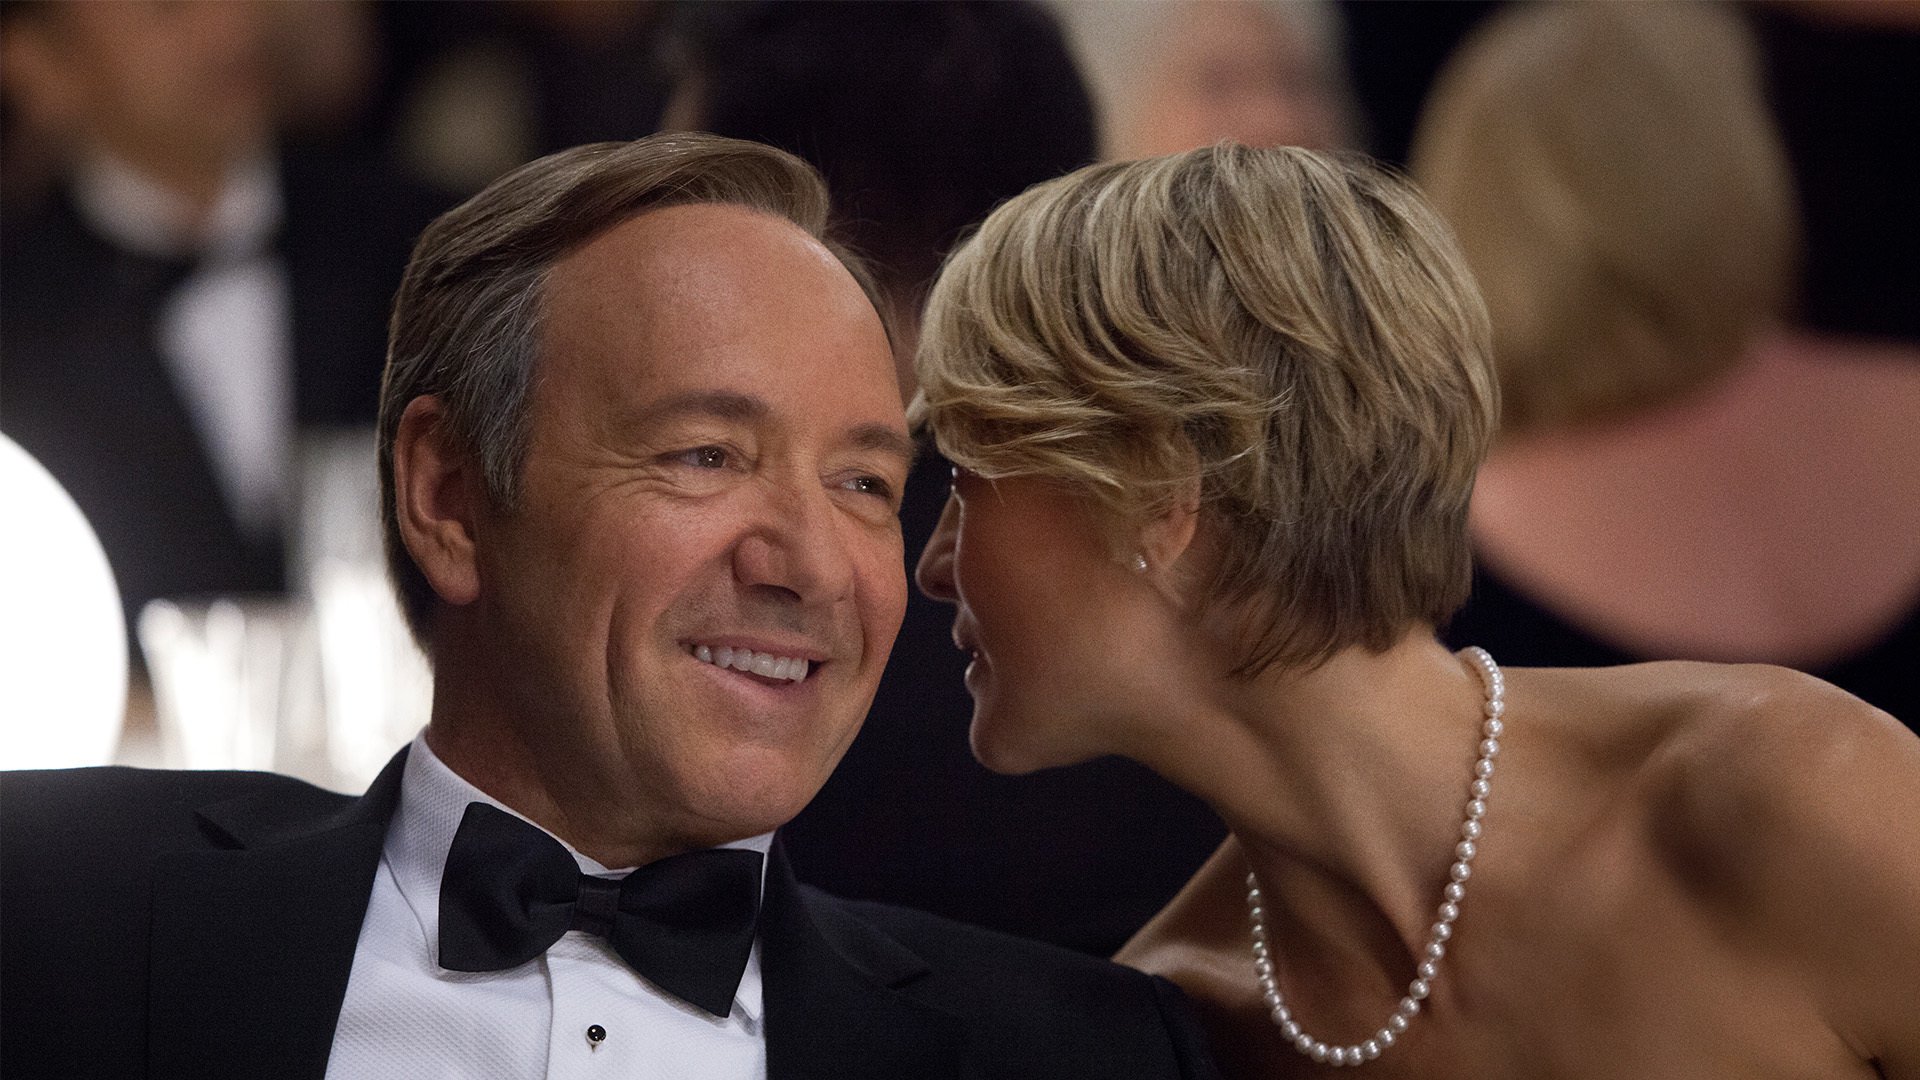 house of cards, tv show, kevin spacey, robin wright